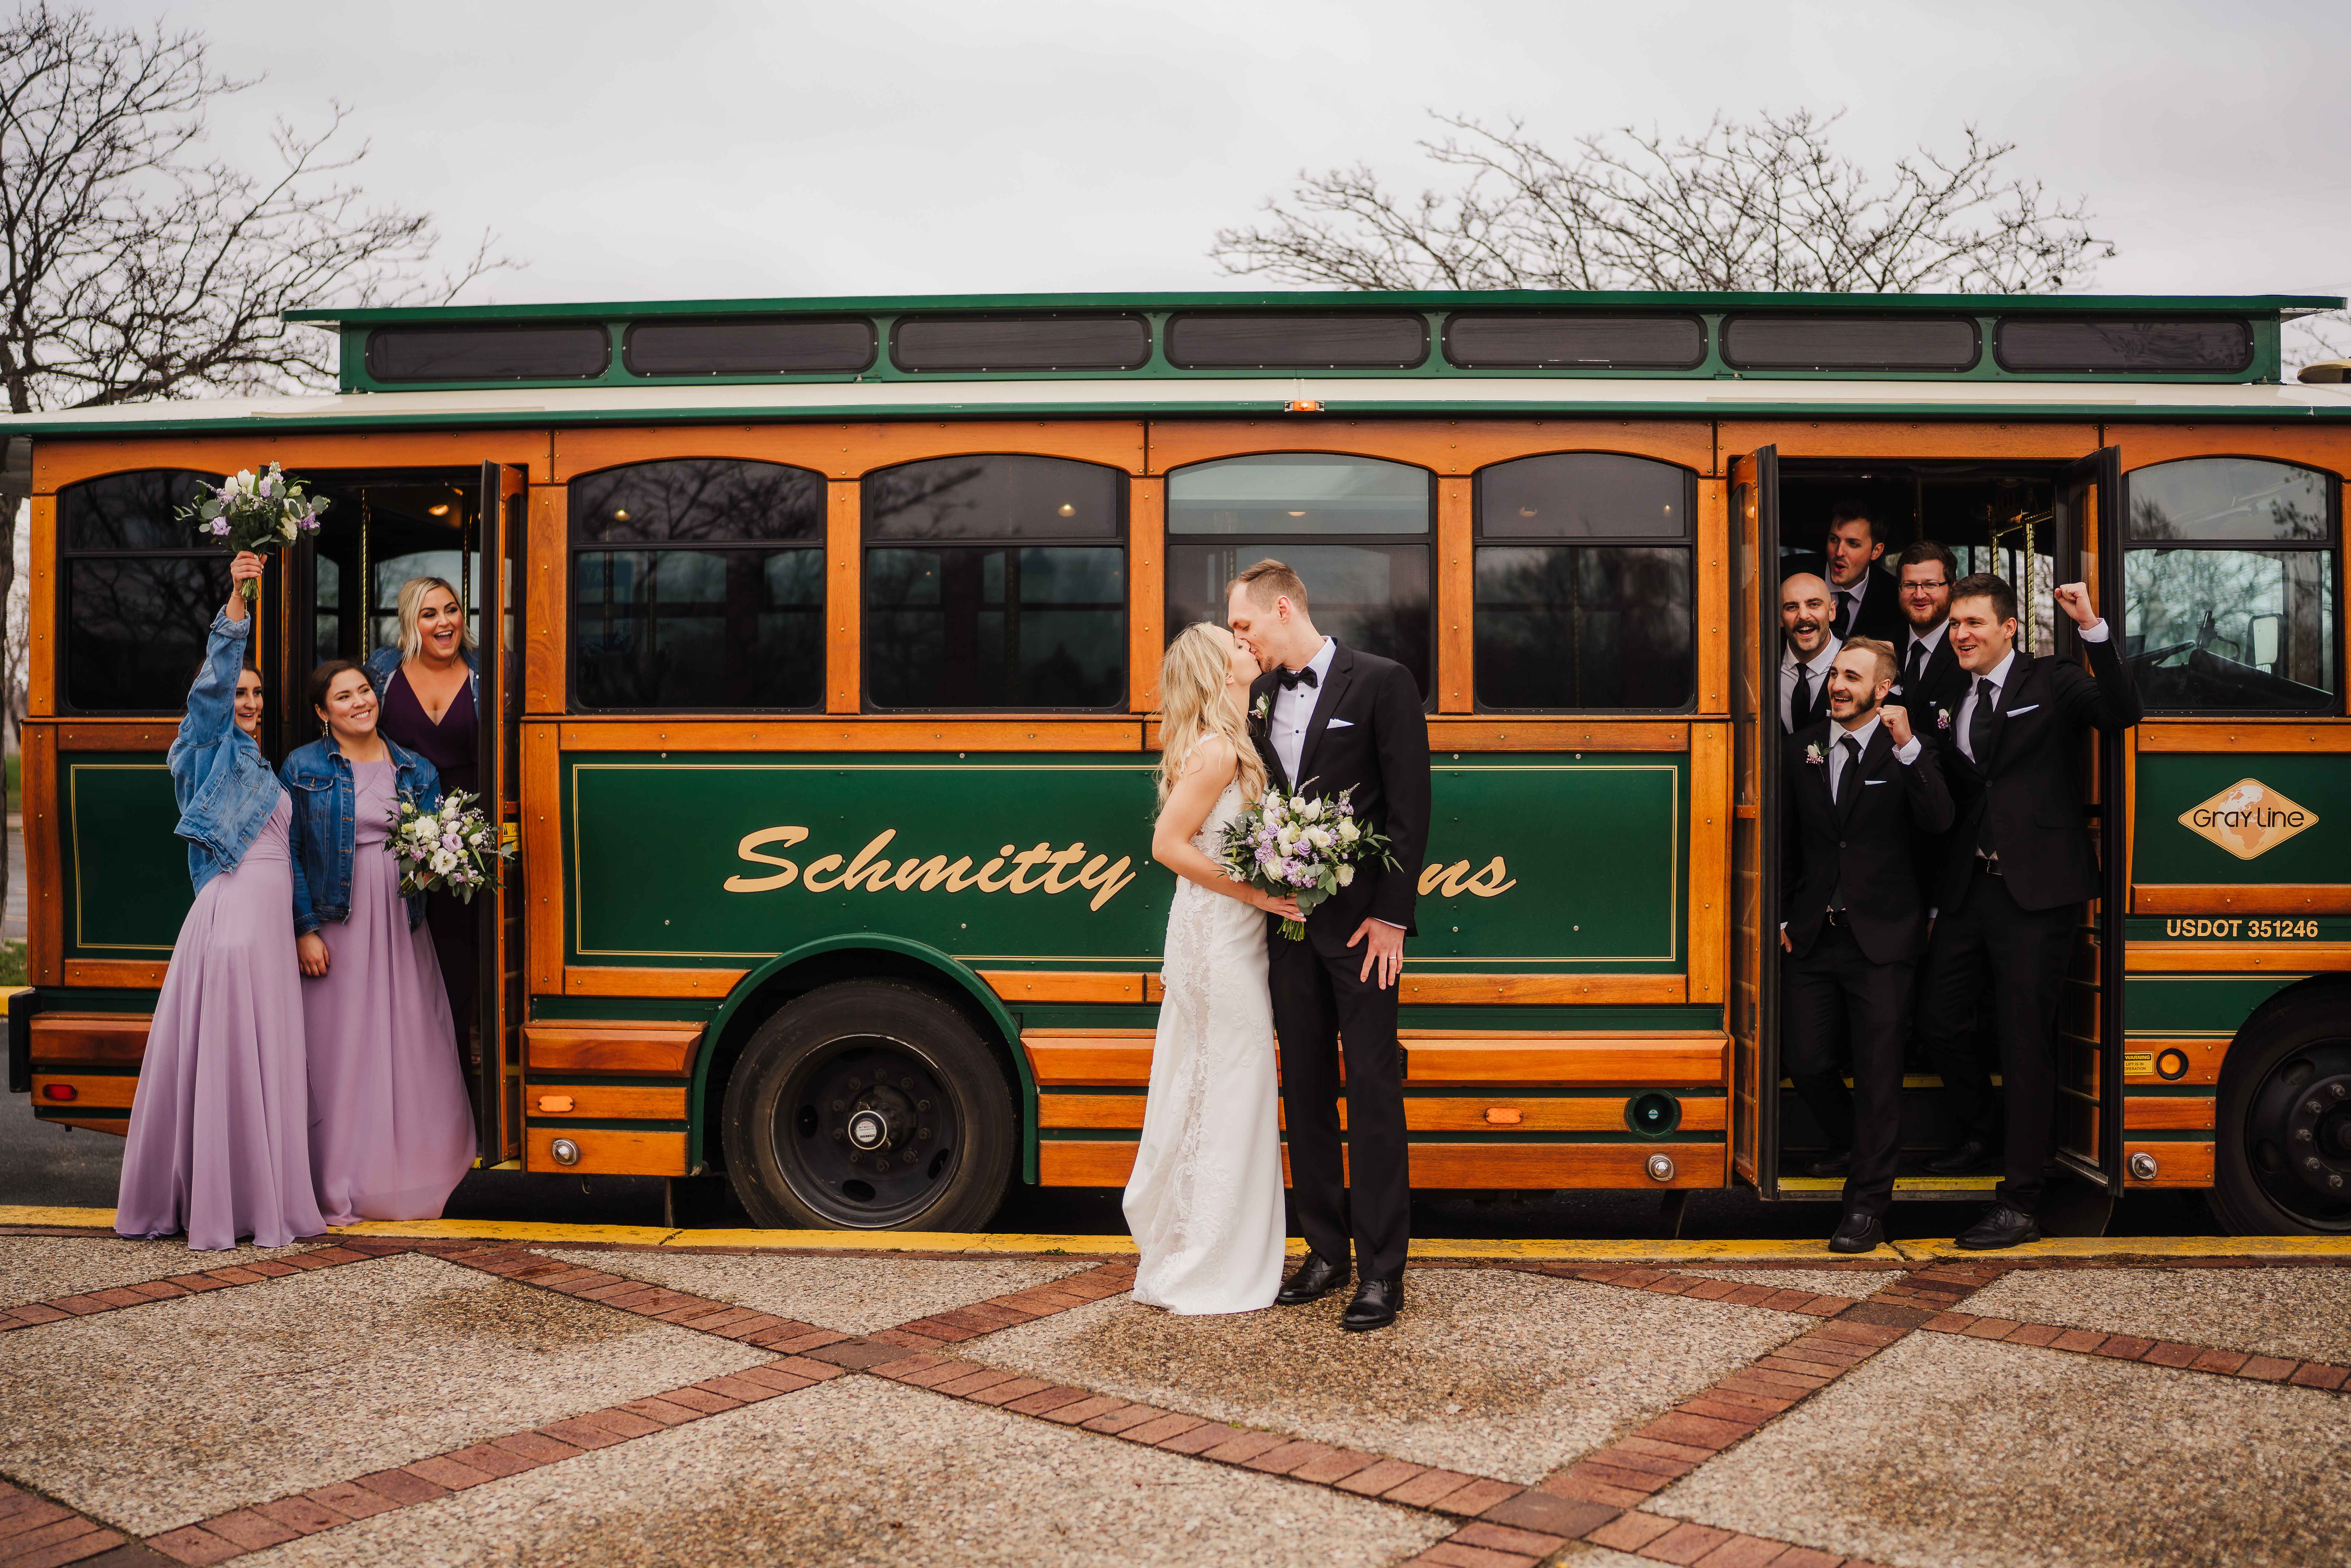 A couple, accompanied by their bridal party, stands in front of a trolley in Minneapolis, ready to embark on a journey of love and celebration. The group radiates happiness and excitement as they pose for a memorable photo in the vibrant cityscape.